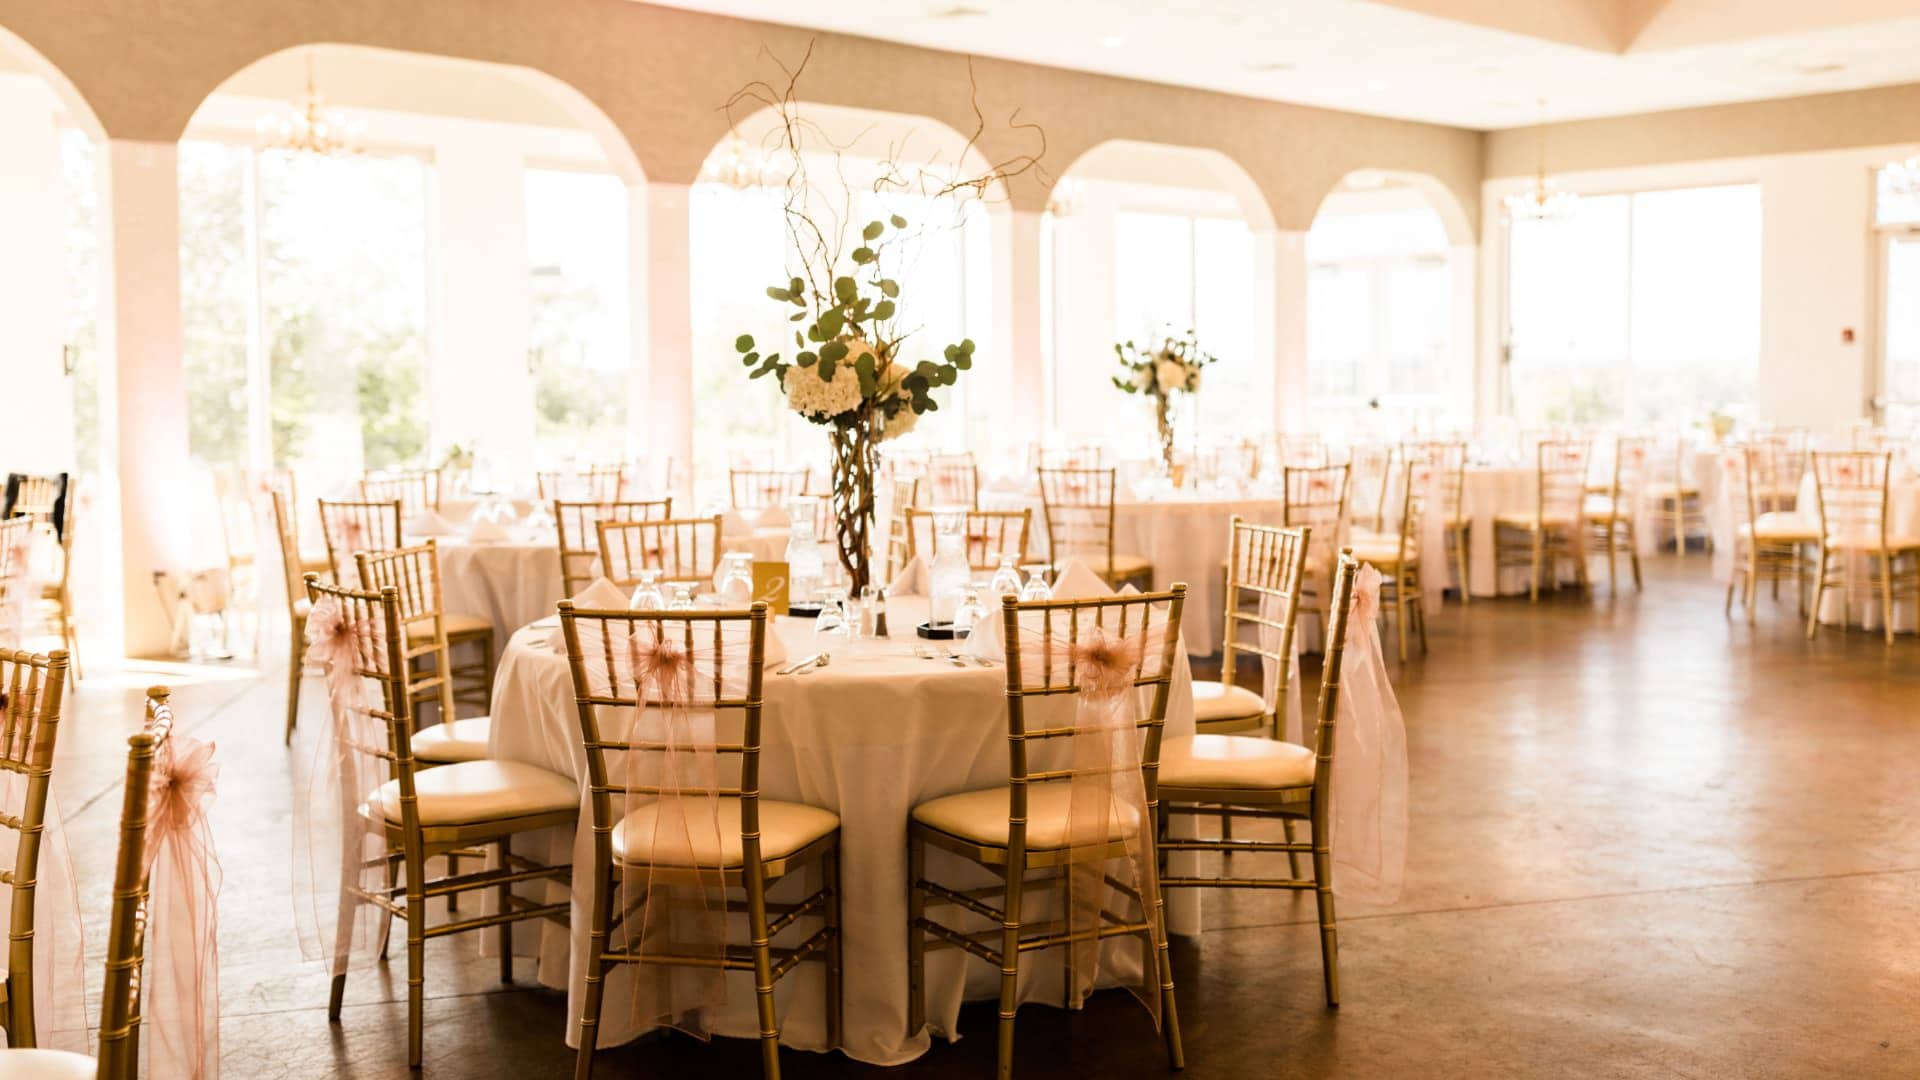 Large reception hall set up with tables with white linens, gold chairs, and large bouquets of flowers